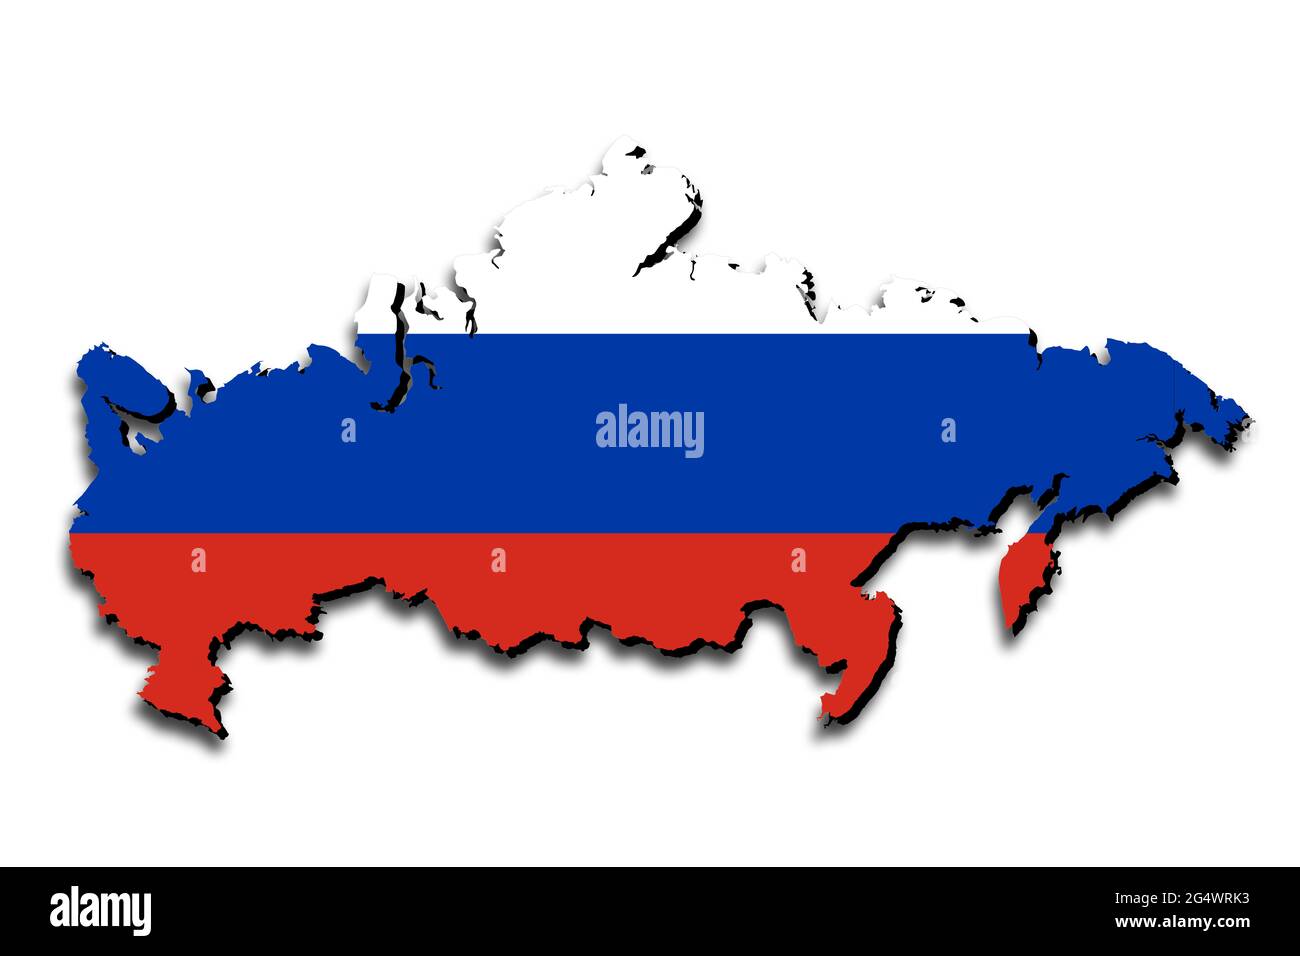 Outline map of Russia with the national flag superimposed over the country. 3D graphics casting a shadow on the white background Stock Photo